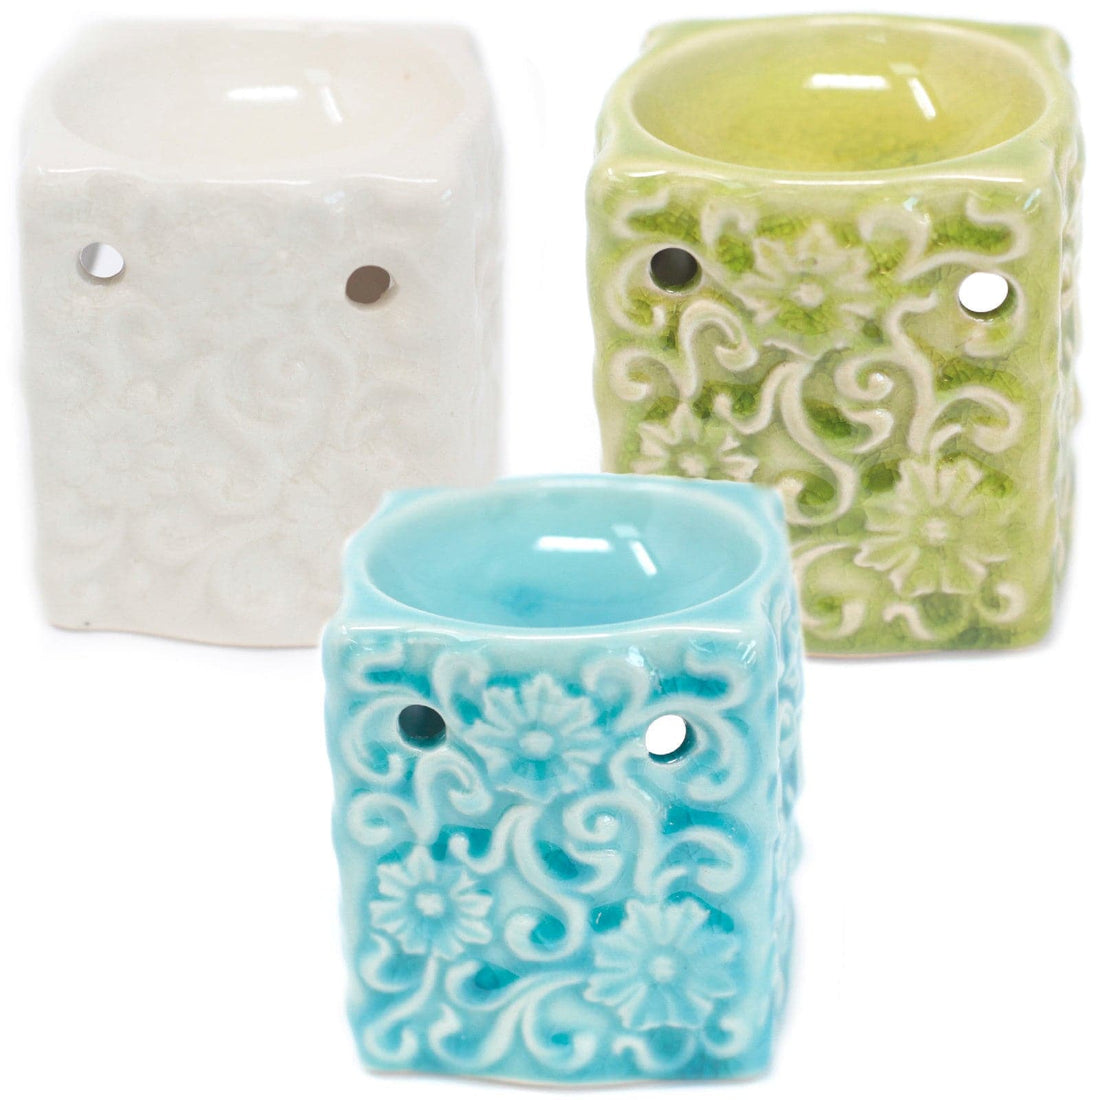 Classic Small Square Floral Oil Burners (aast) - best price from Maltashopper.com OBCS-06DS